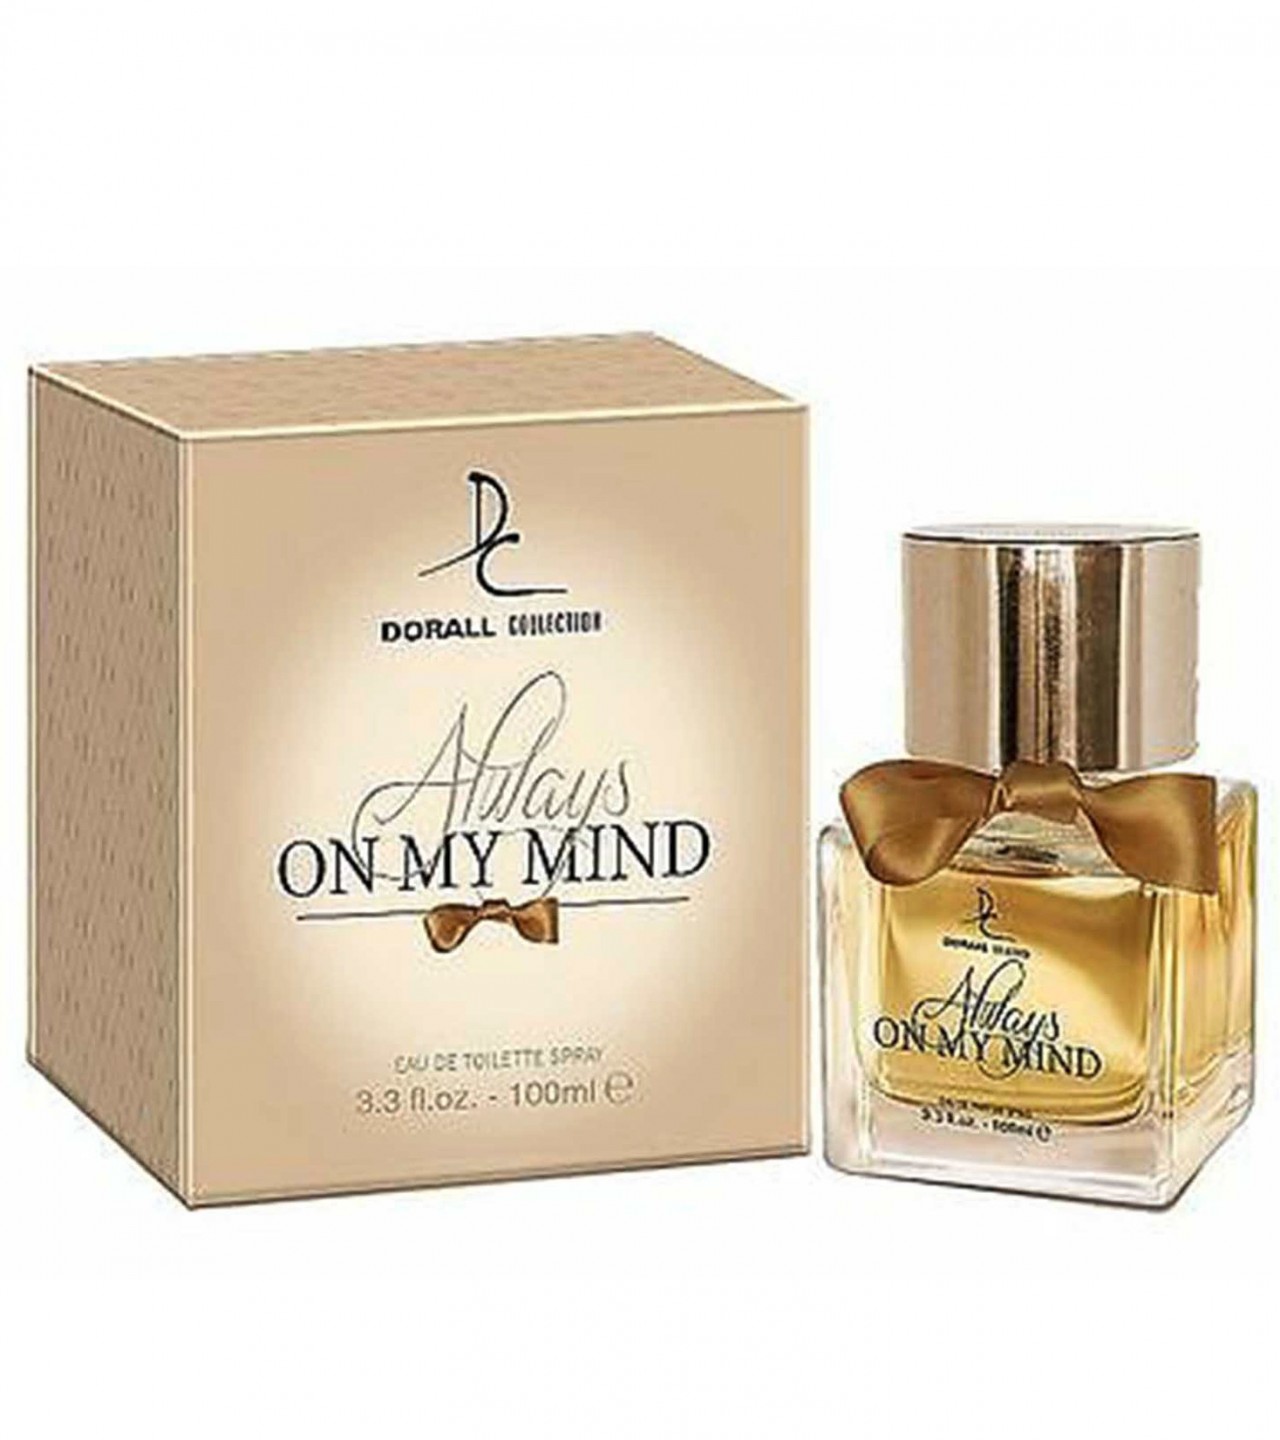 Dorall Collection Always On My Mind Perfume For Women – 100 ml